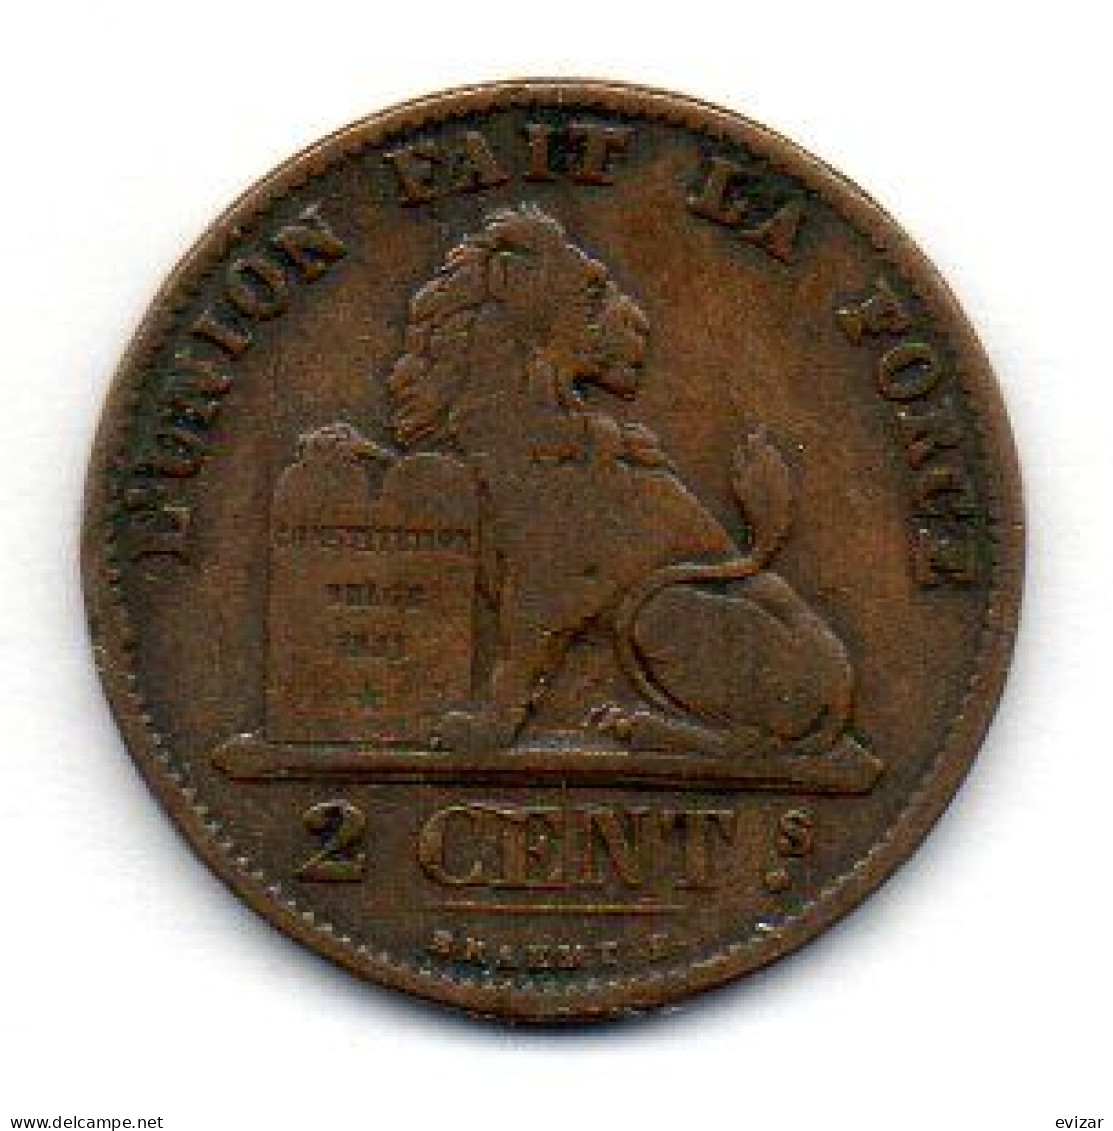 BELGIUM, 2 Centimes, Copper, Year 1876, KM # 35.1, French Legend - 2 Centimes